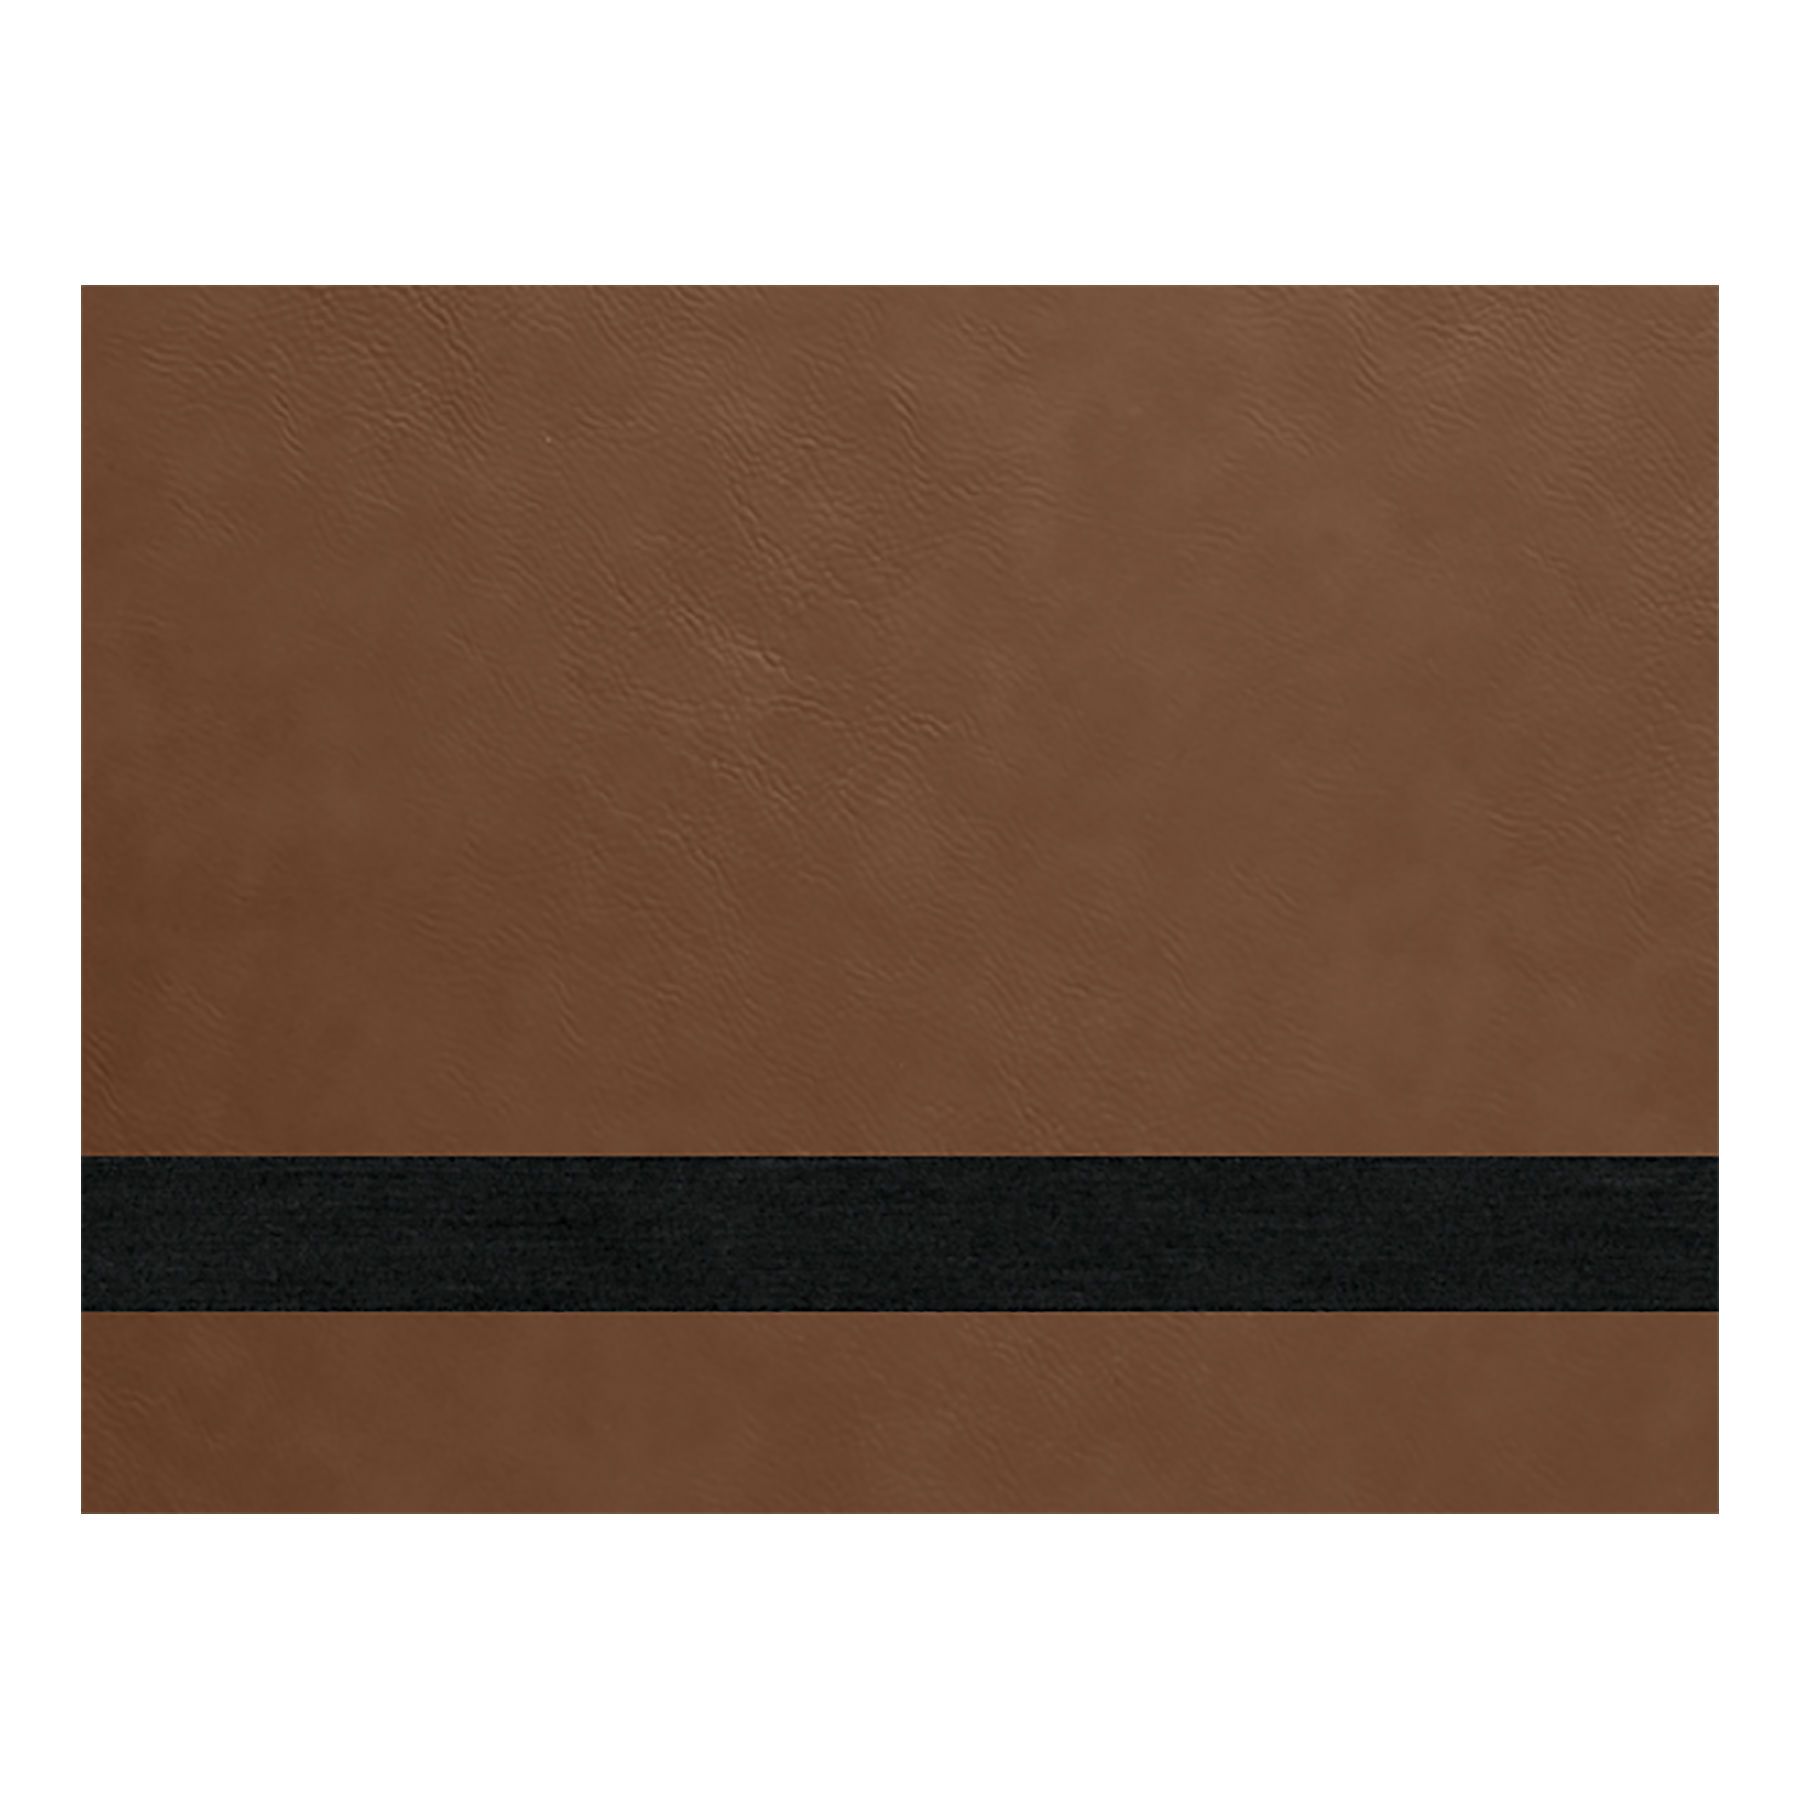 PRE-ORDER! Full Size Laserable Leatherette Sheet Stock, Epilog Fusion Edge Laser Engravers (Available Jan. 2022) Engraving Supplies Craftworks NW Fusion Edge 24 (24" x 24") Dark Brown/Black 